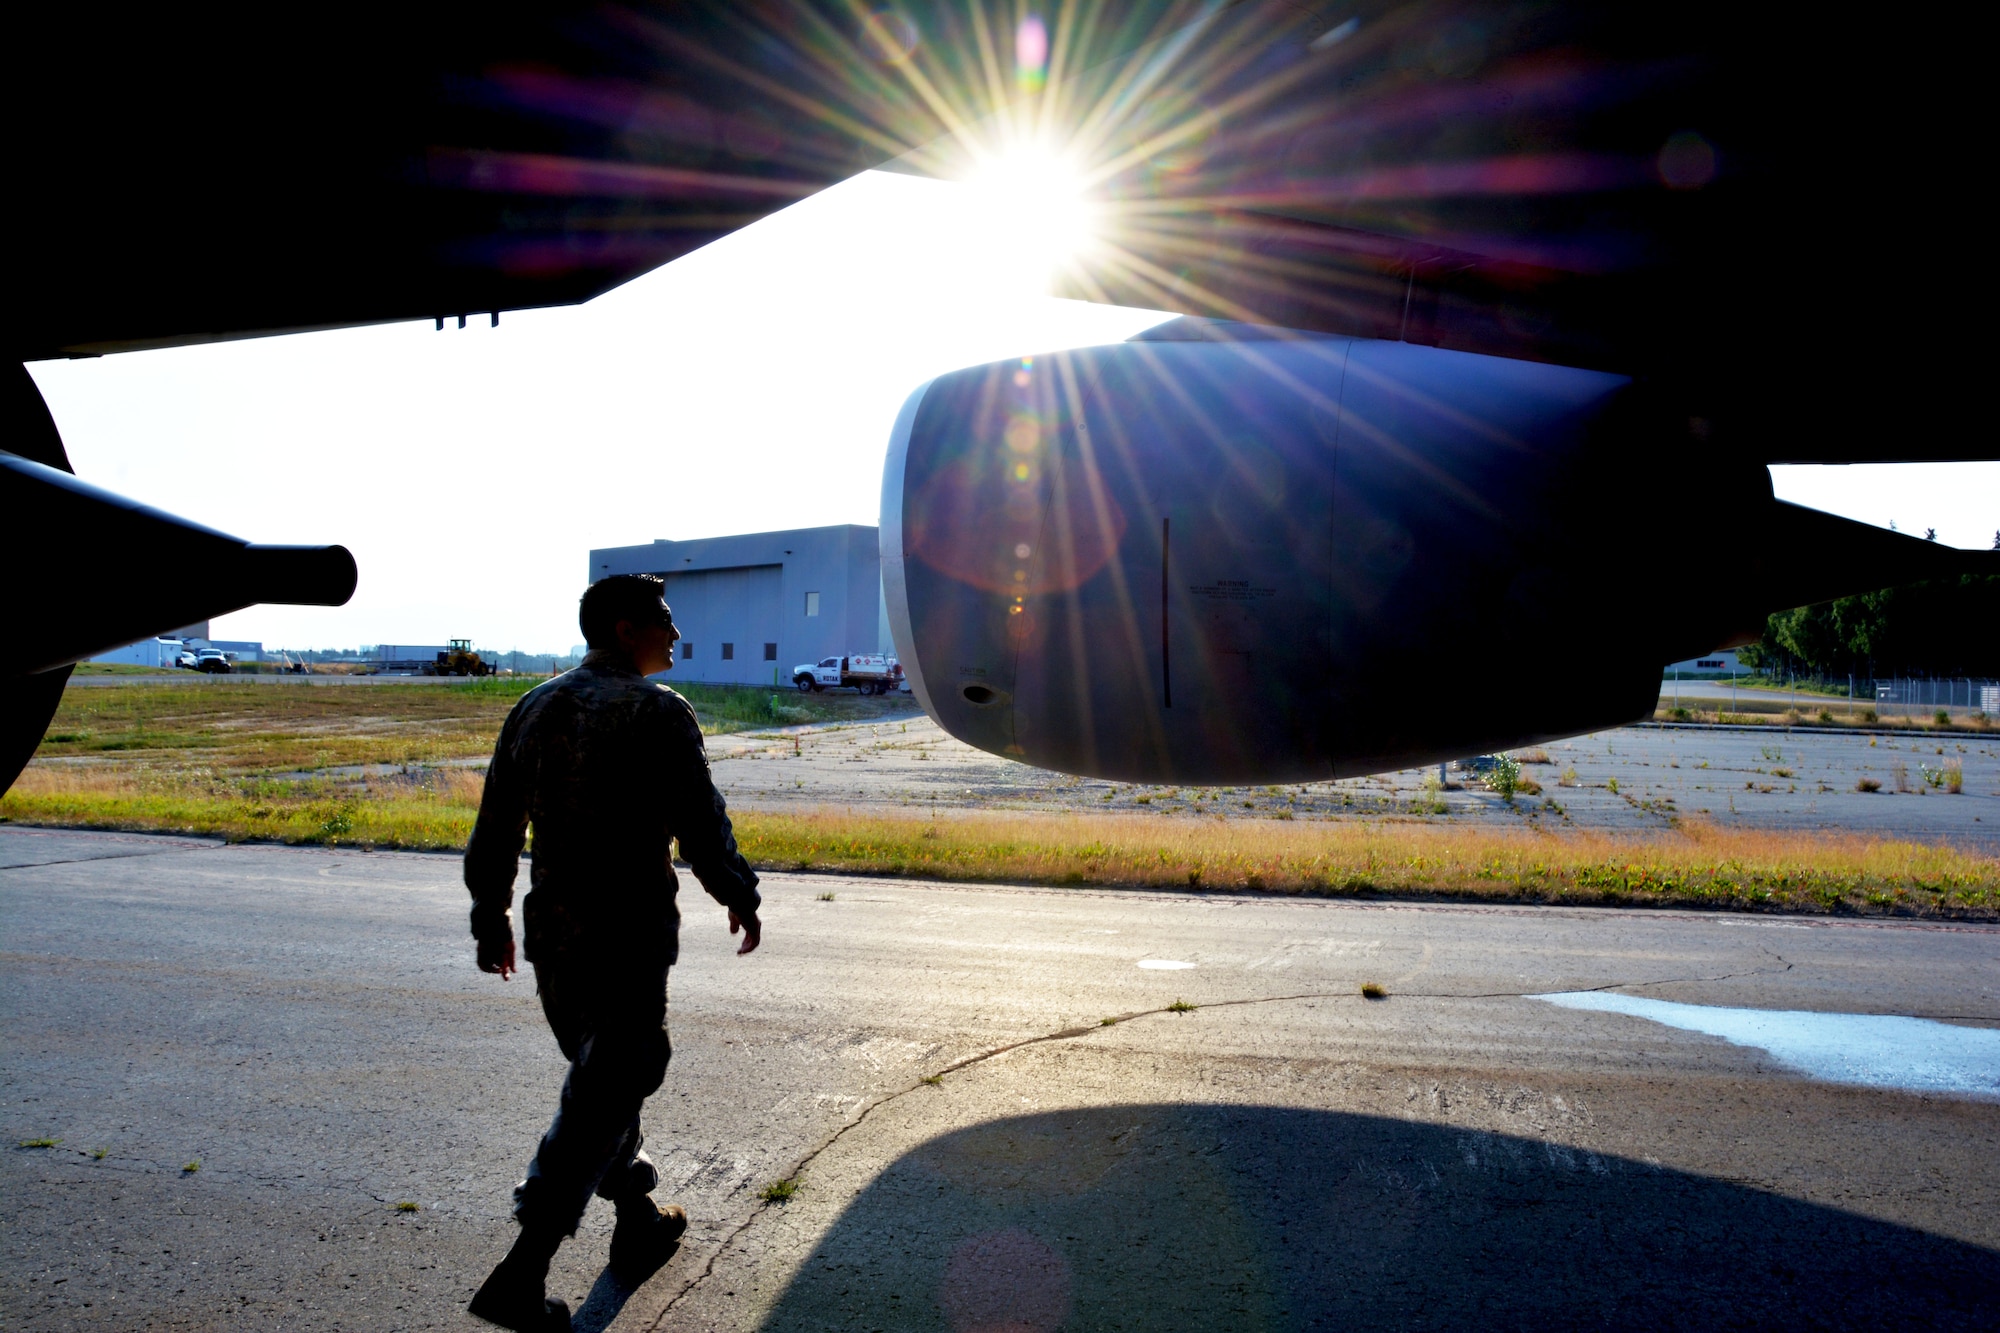 Tech. Sgt. Adrian Condit, 507th Maintenance Squadron crewchief, inspects a KC-135R Stratotanker during pre-flight operations at Ted Stevens Anchorage International Airport, Alaska, July 19, 2019. (U.S. Air Force photo by Tech. Sgt. Samantha Mathison)